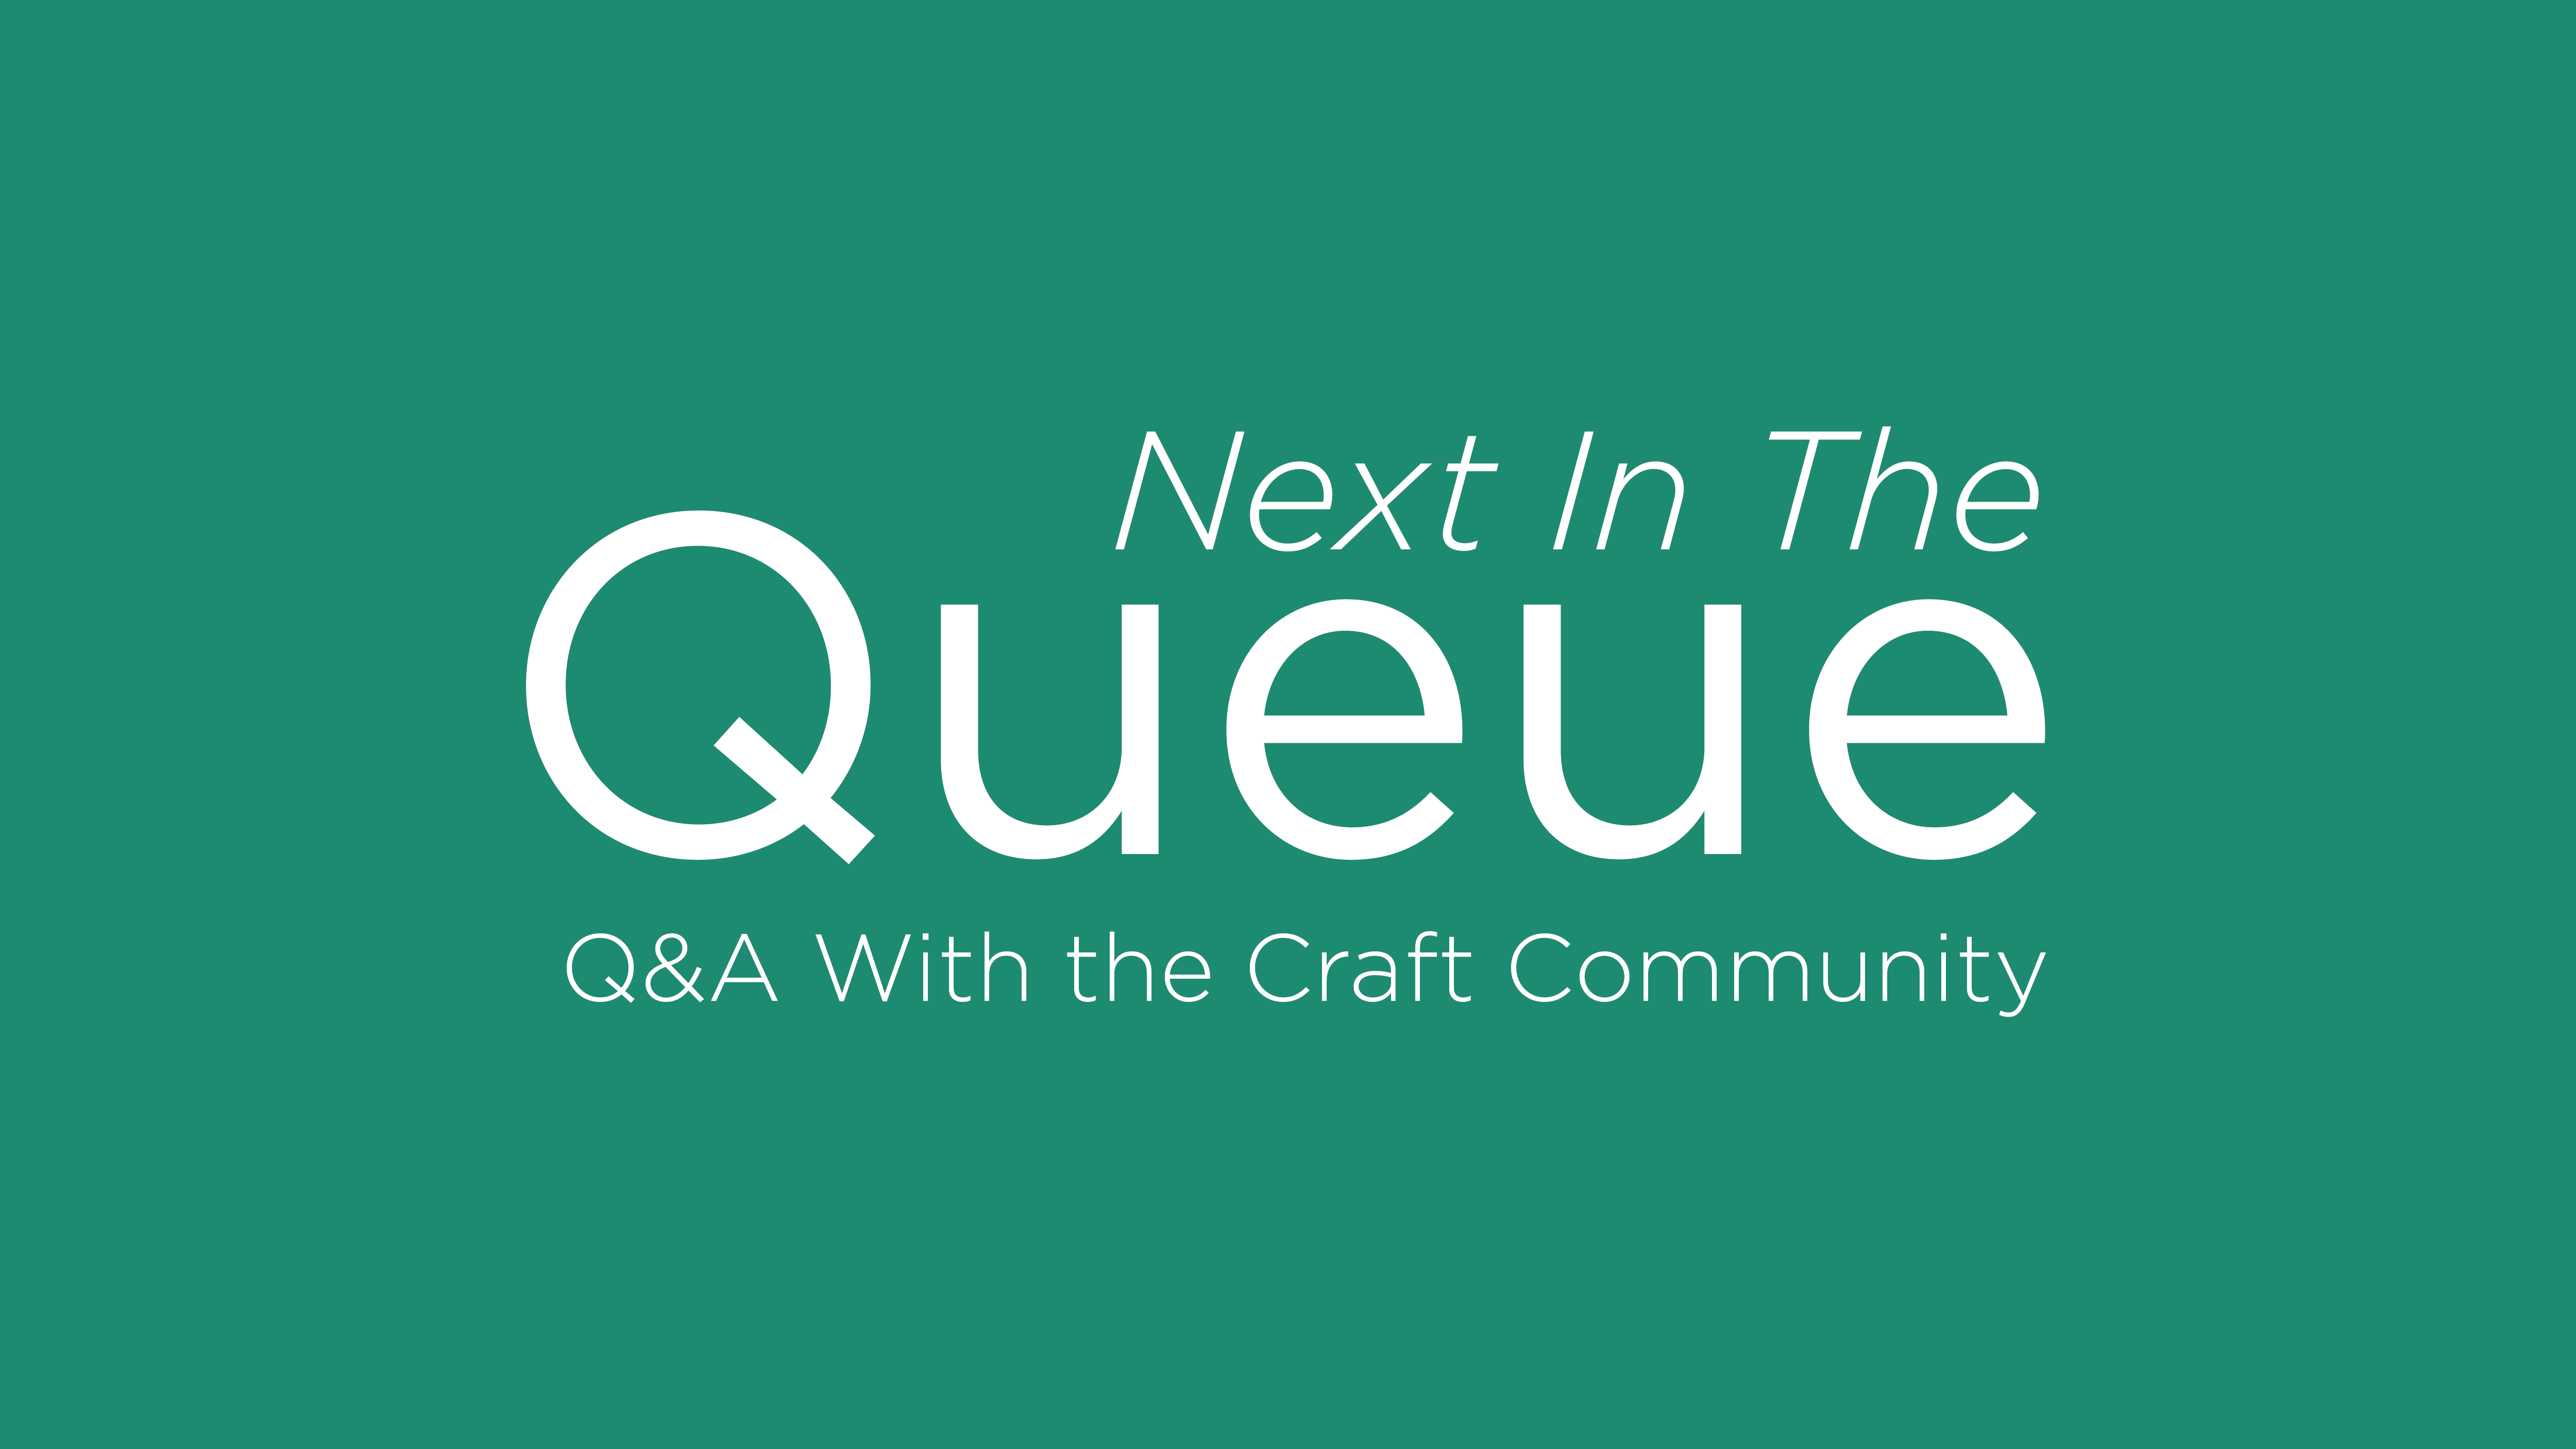 Next In The Queue Q and A with the craft community